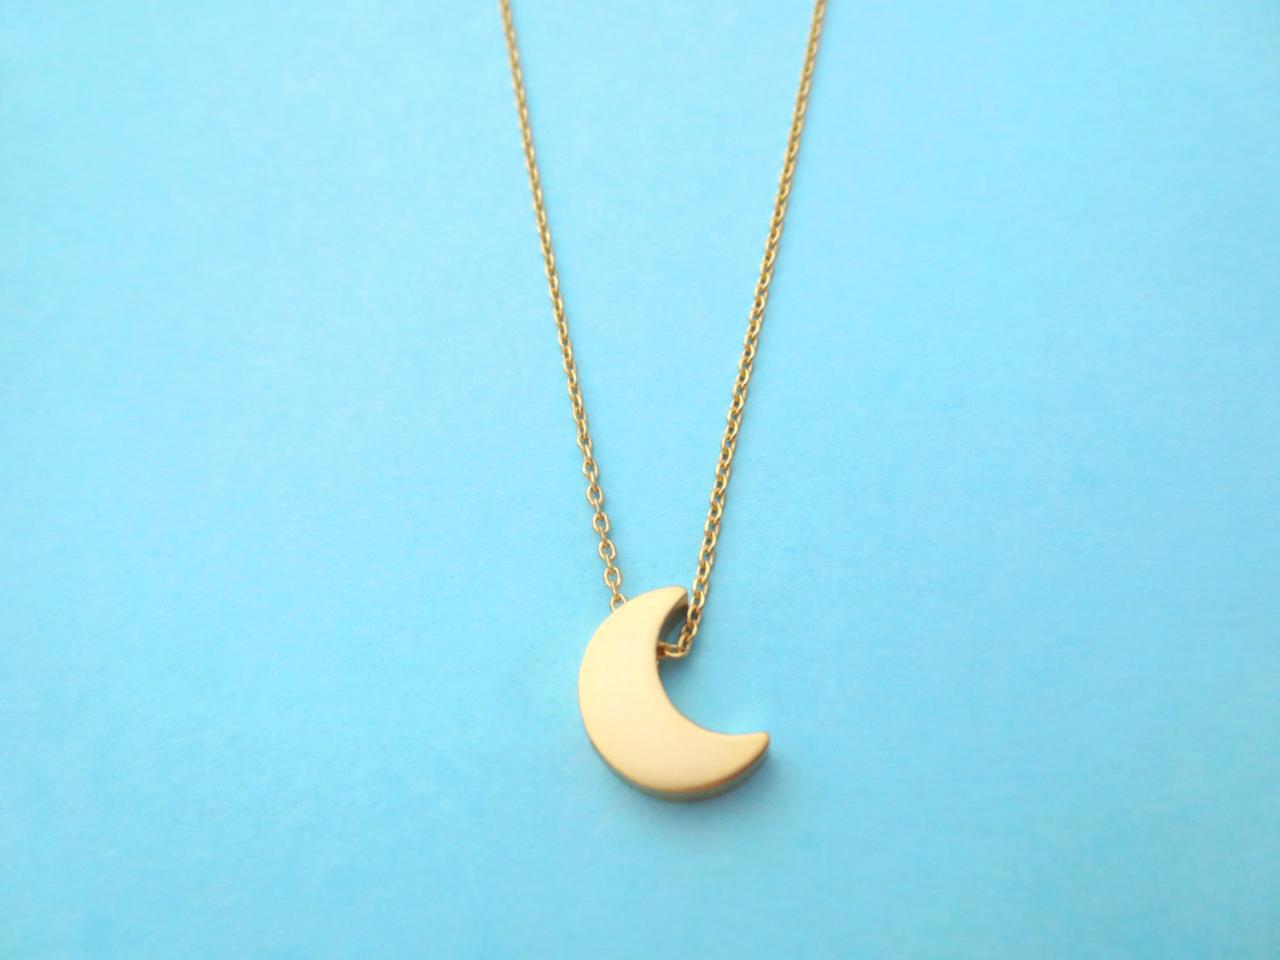 Crescent Moon Necklace, Gold Moon Necklace, Simple Necklace, Modern, Cute, Gold Necklace